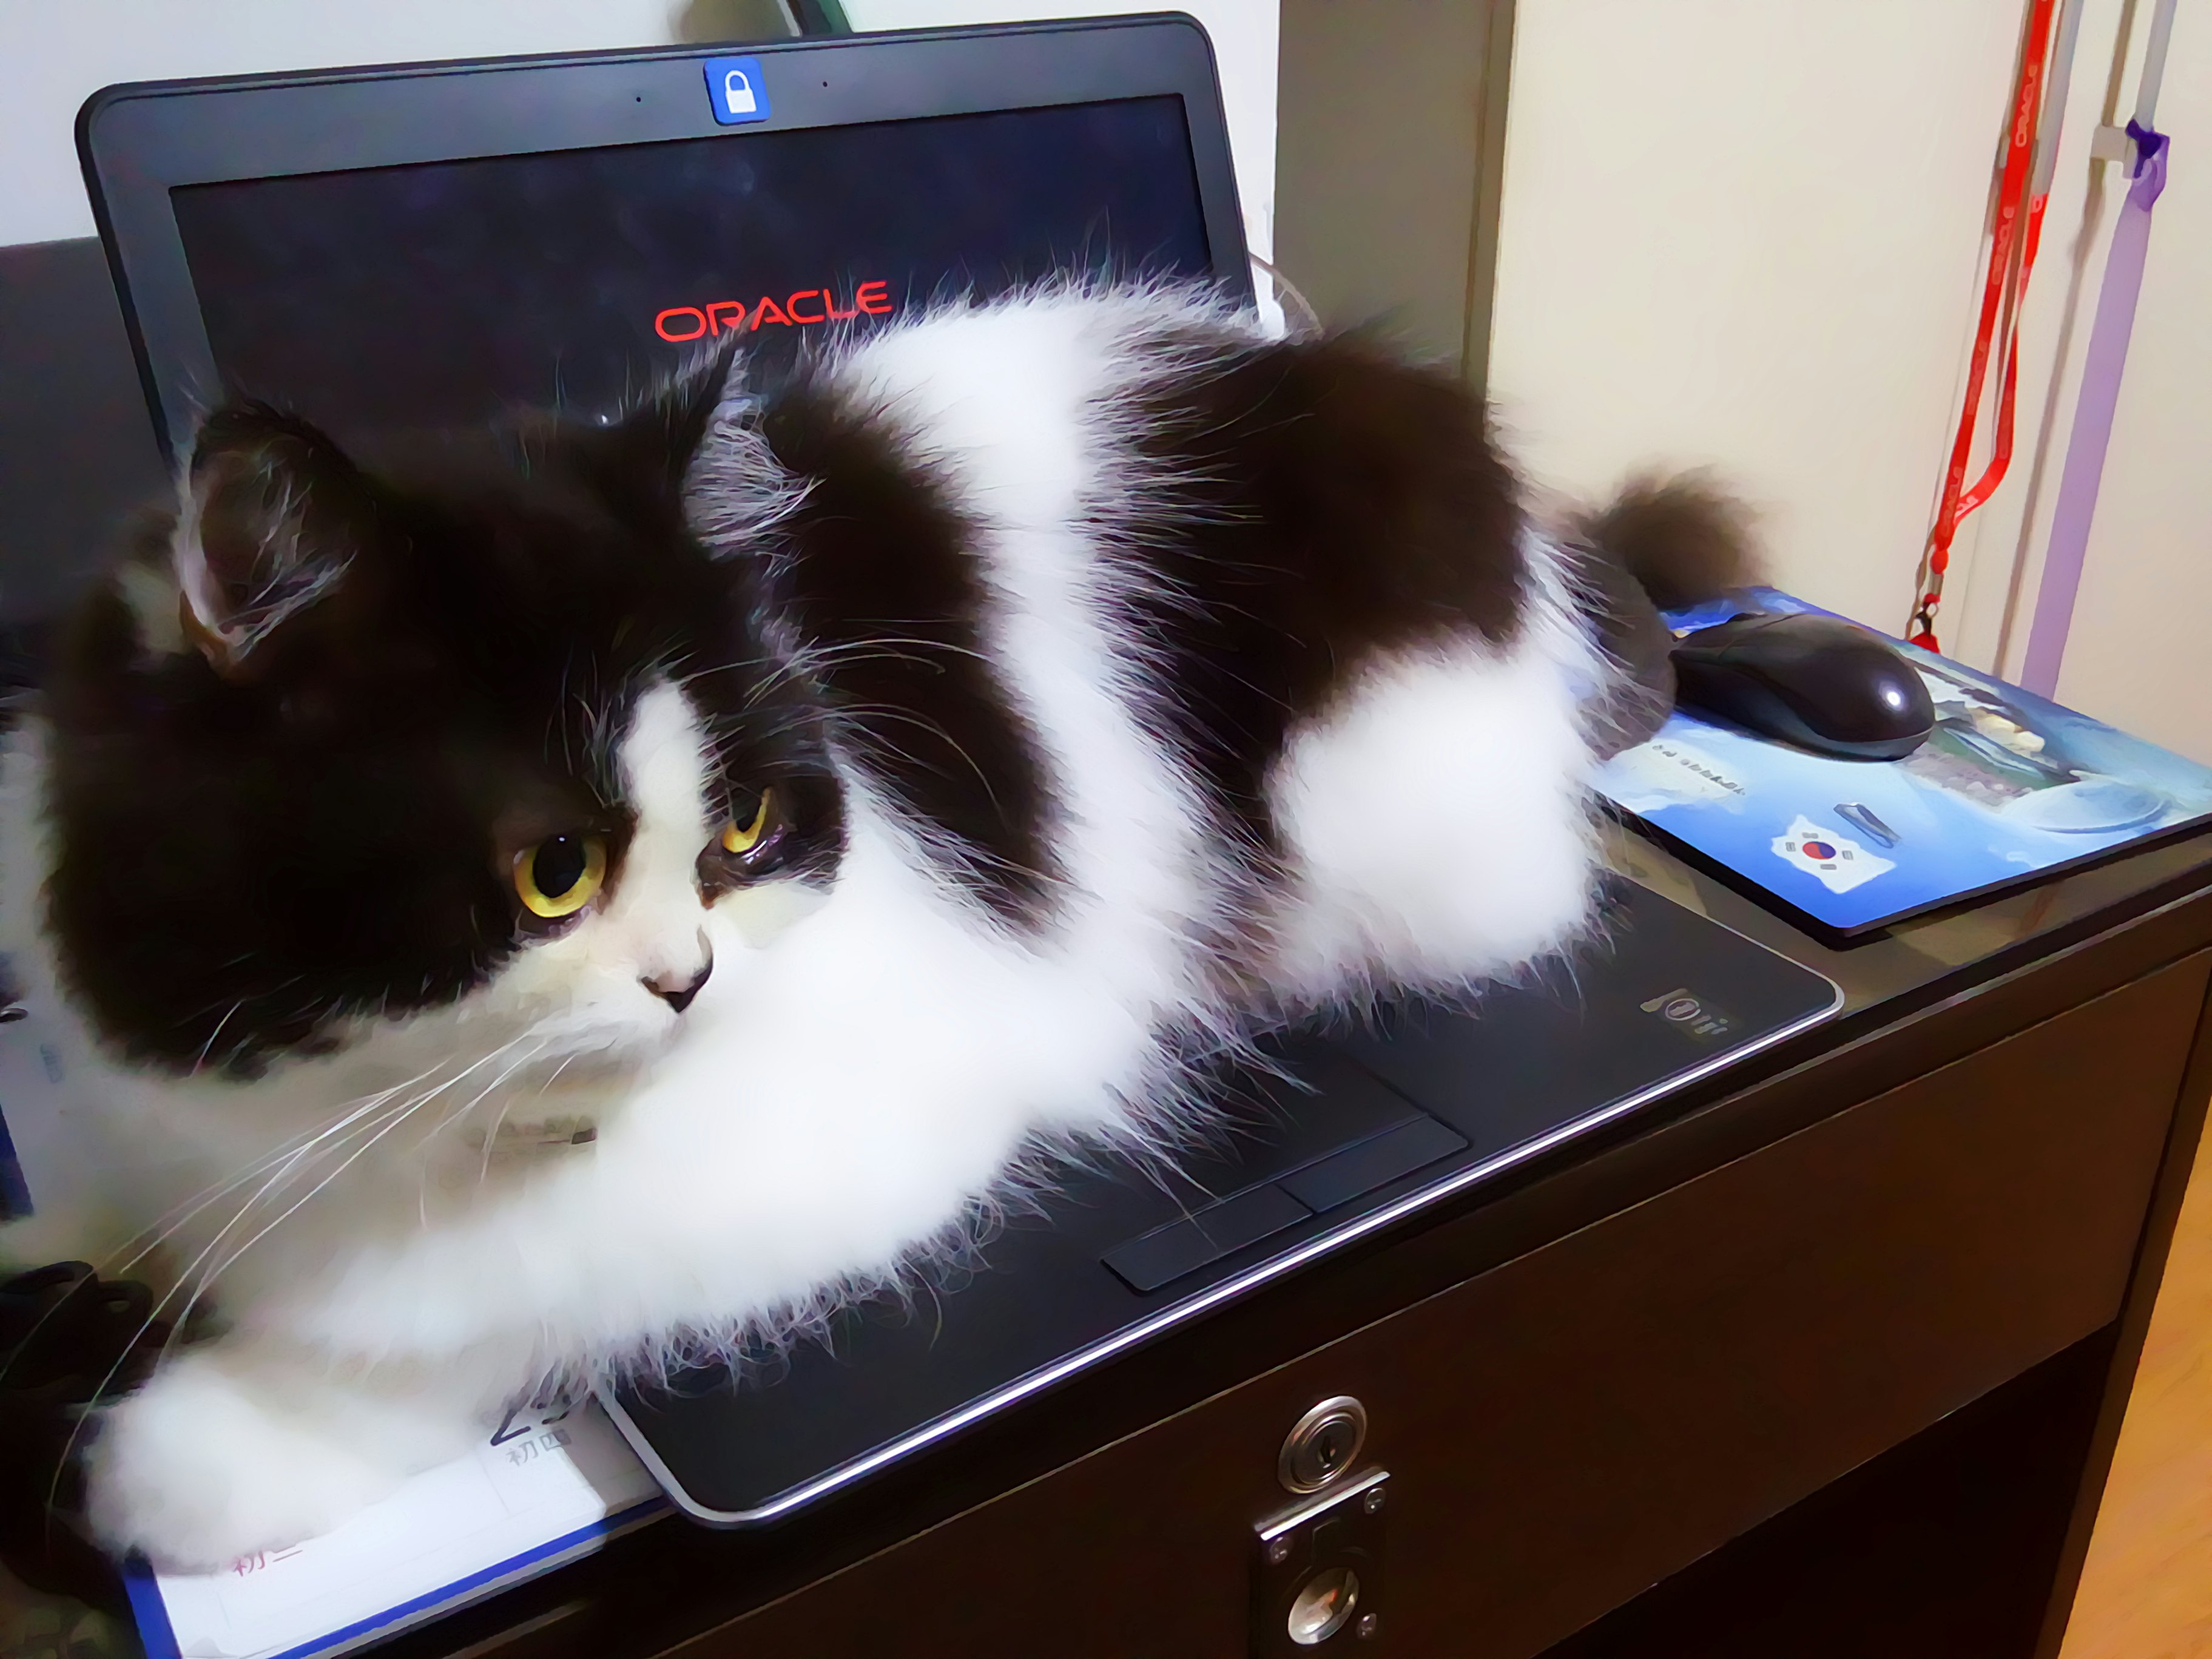 Why Cats Love Your Laptop, According to Science